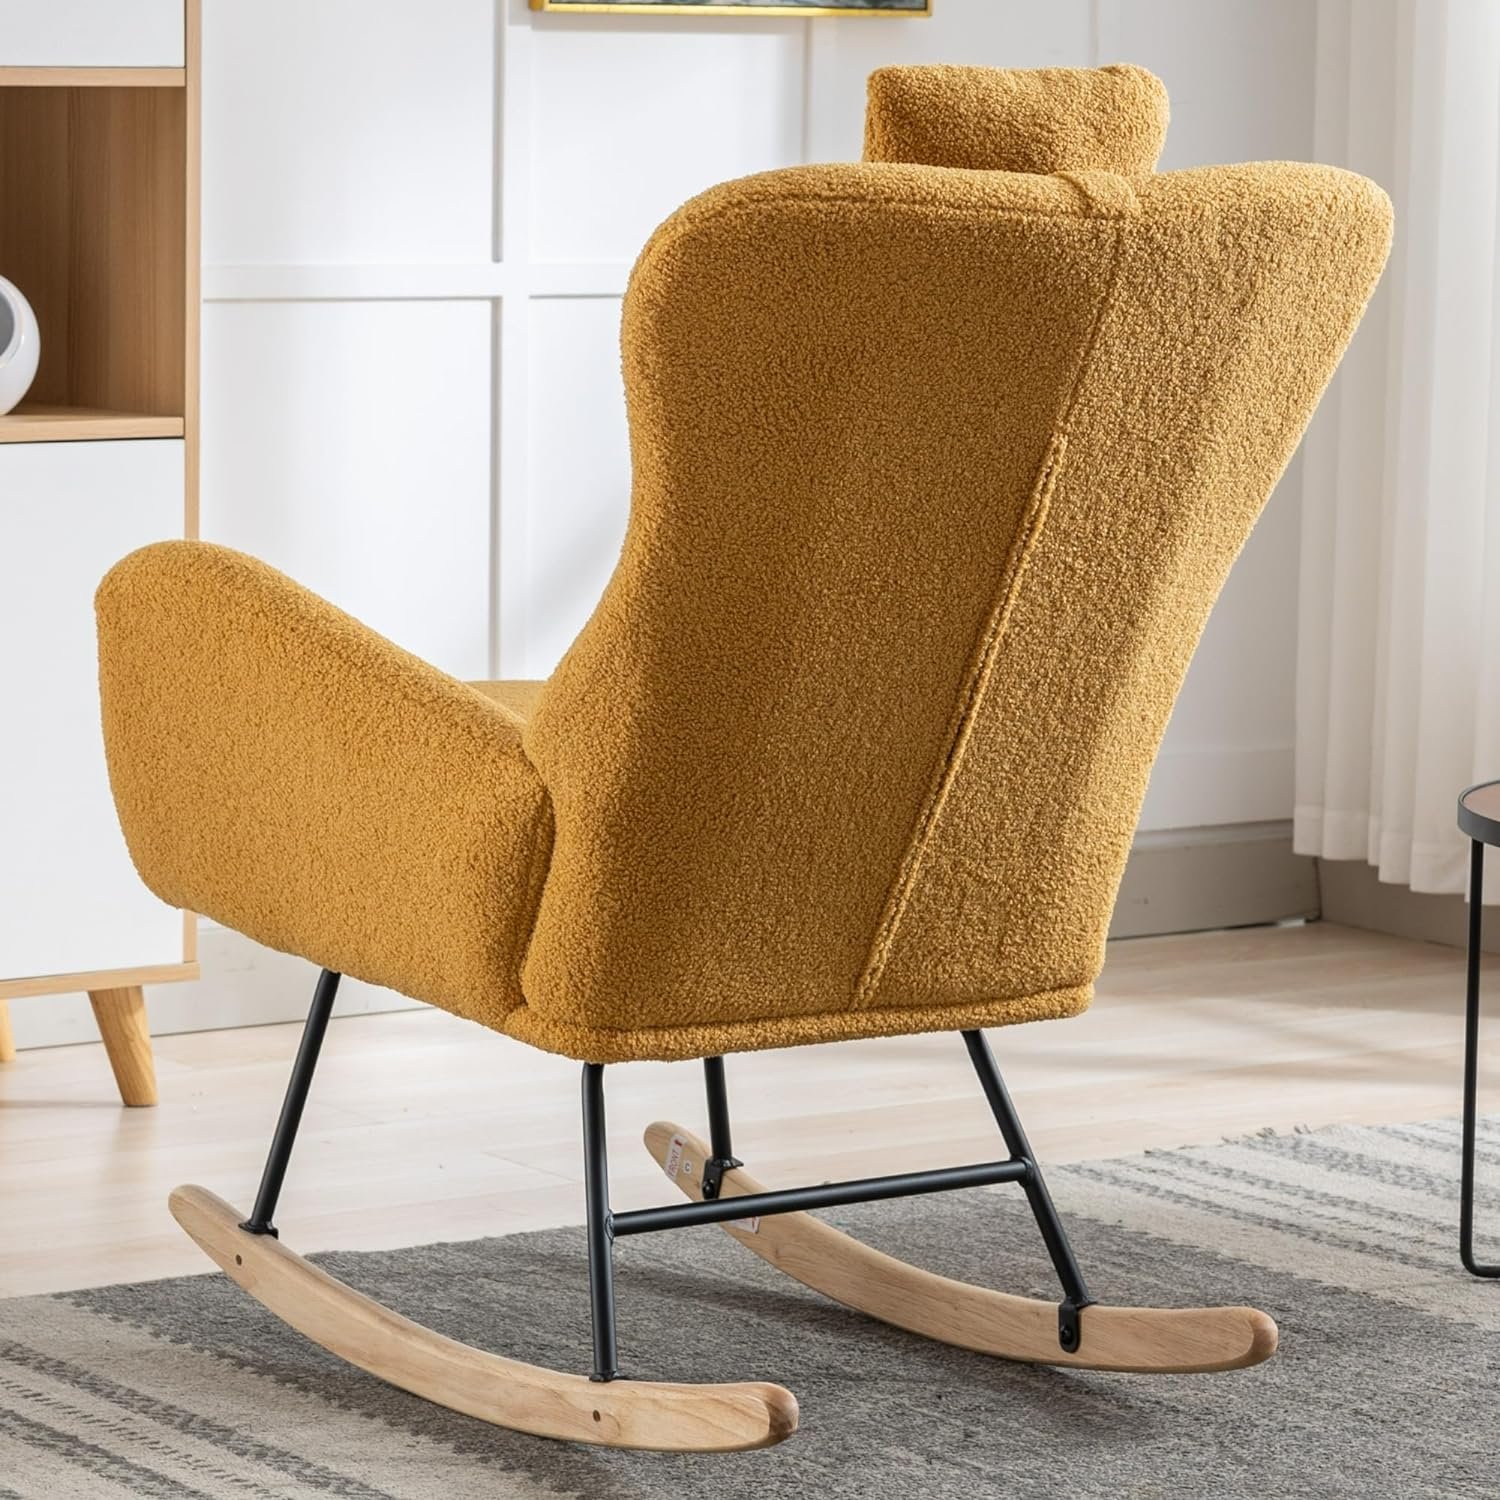 Safe Solid Wood Base Rocking Chair Review